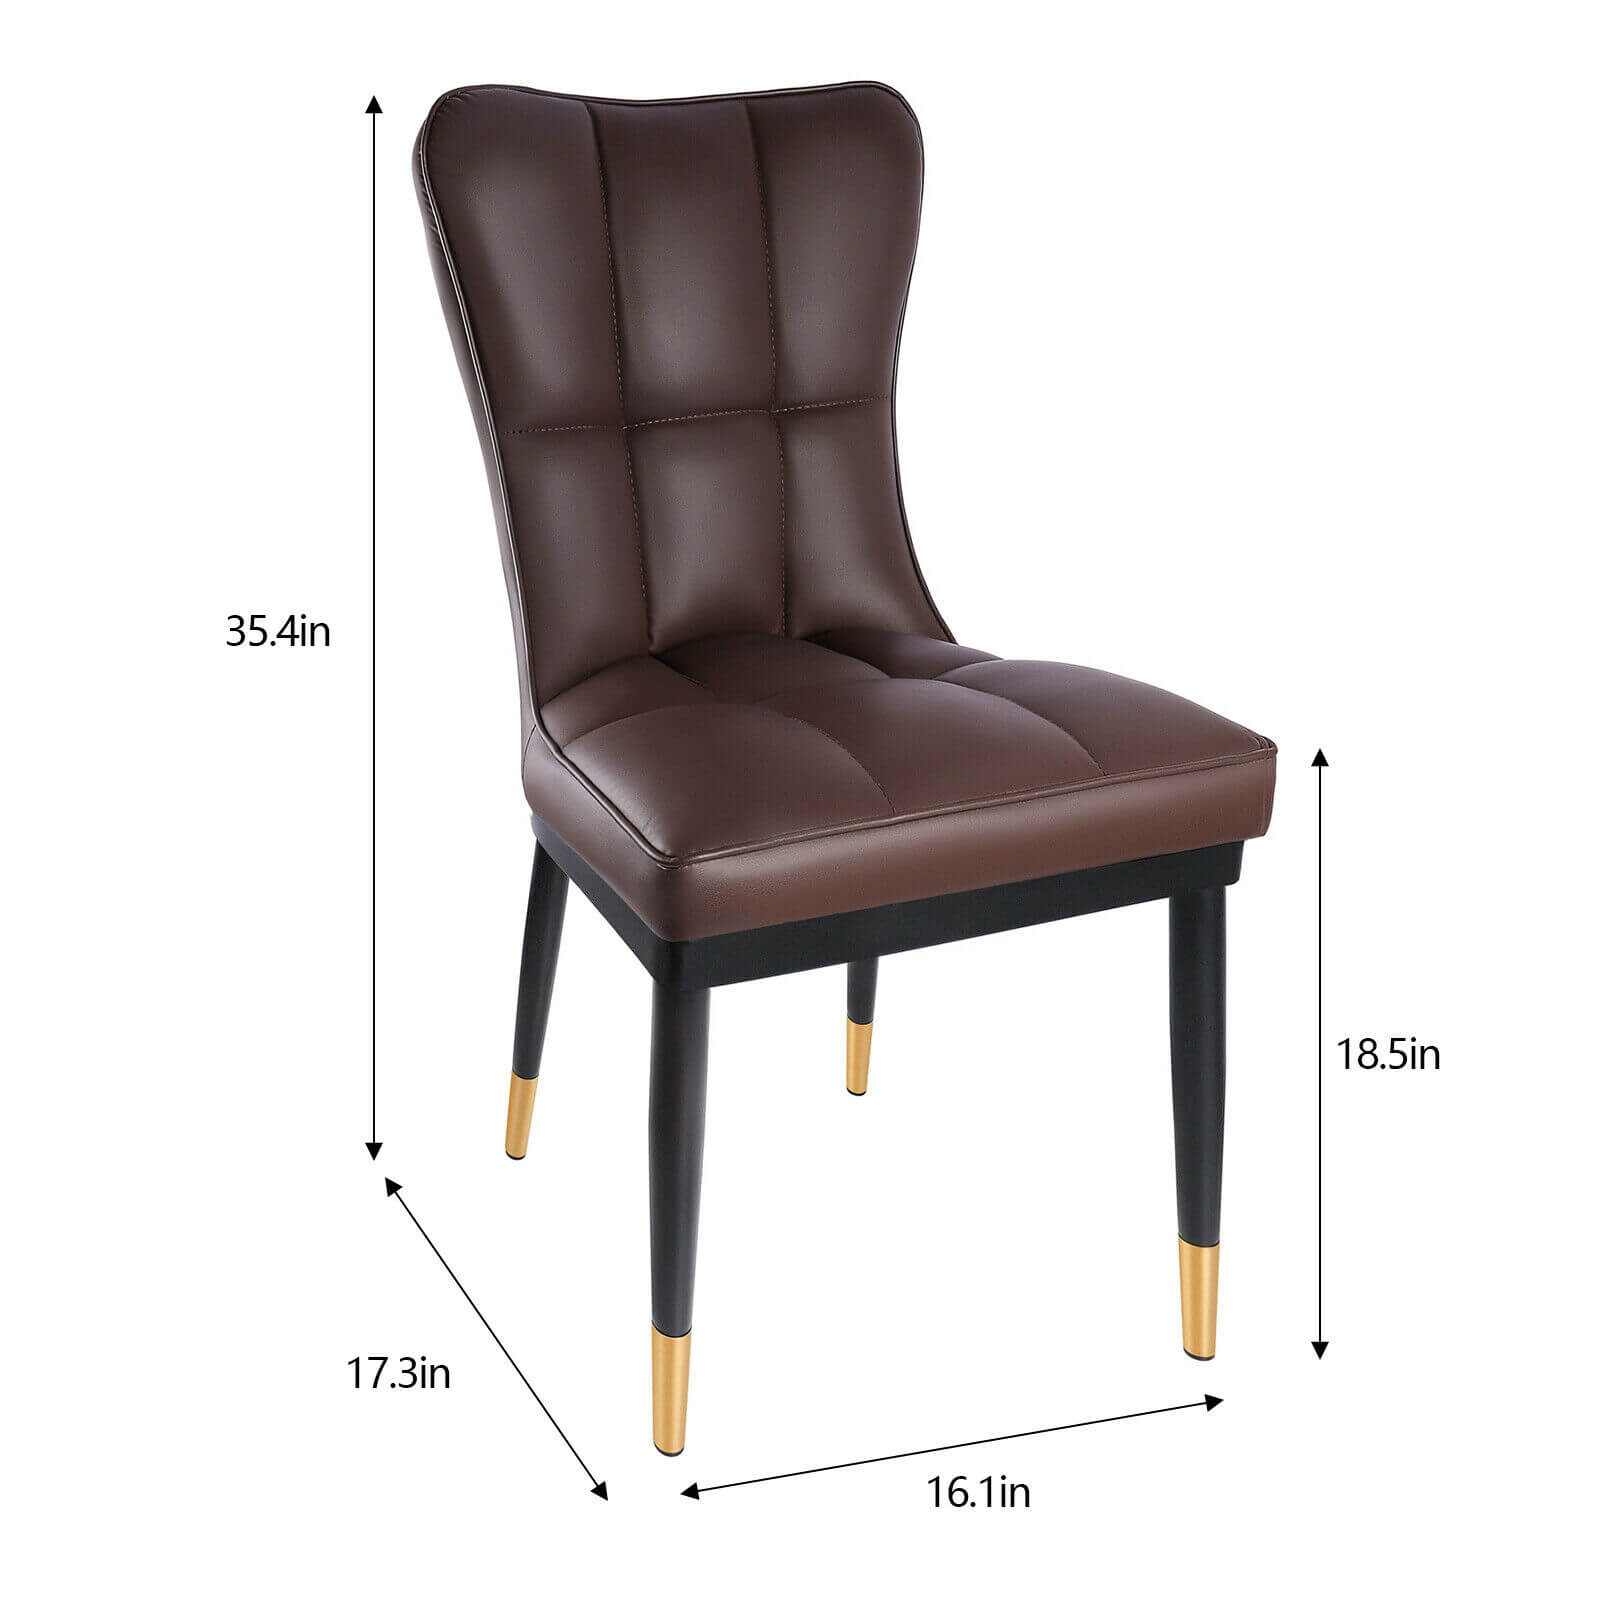 Size of leather dining chair